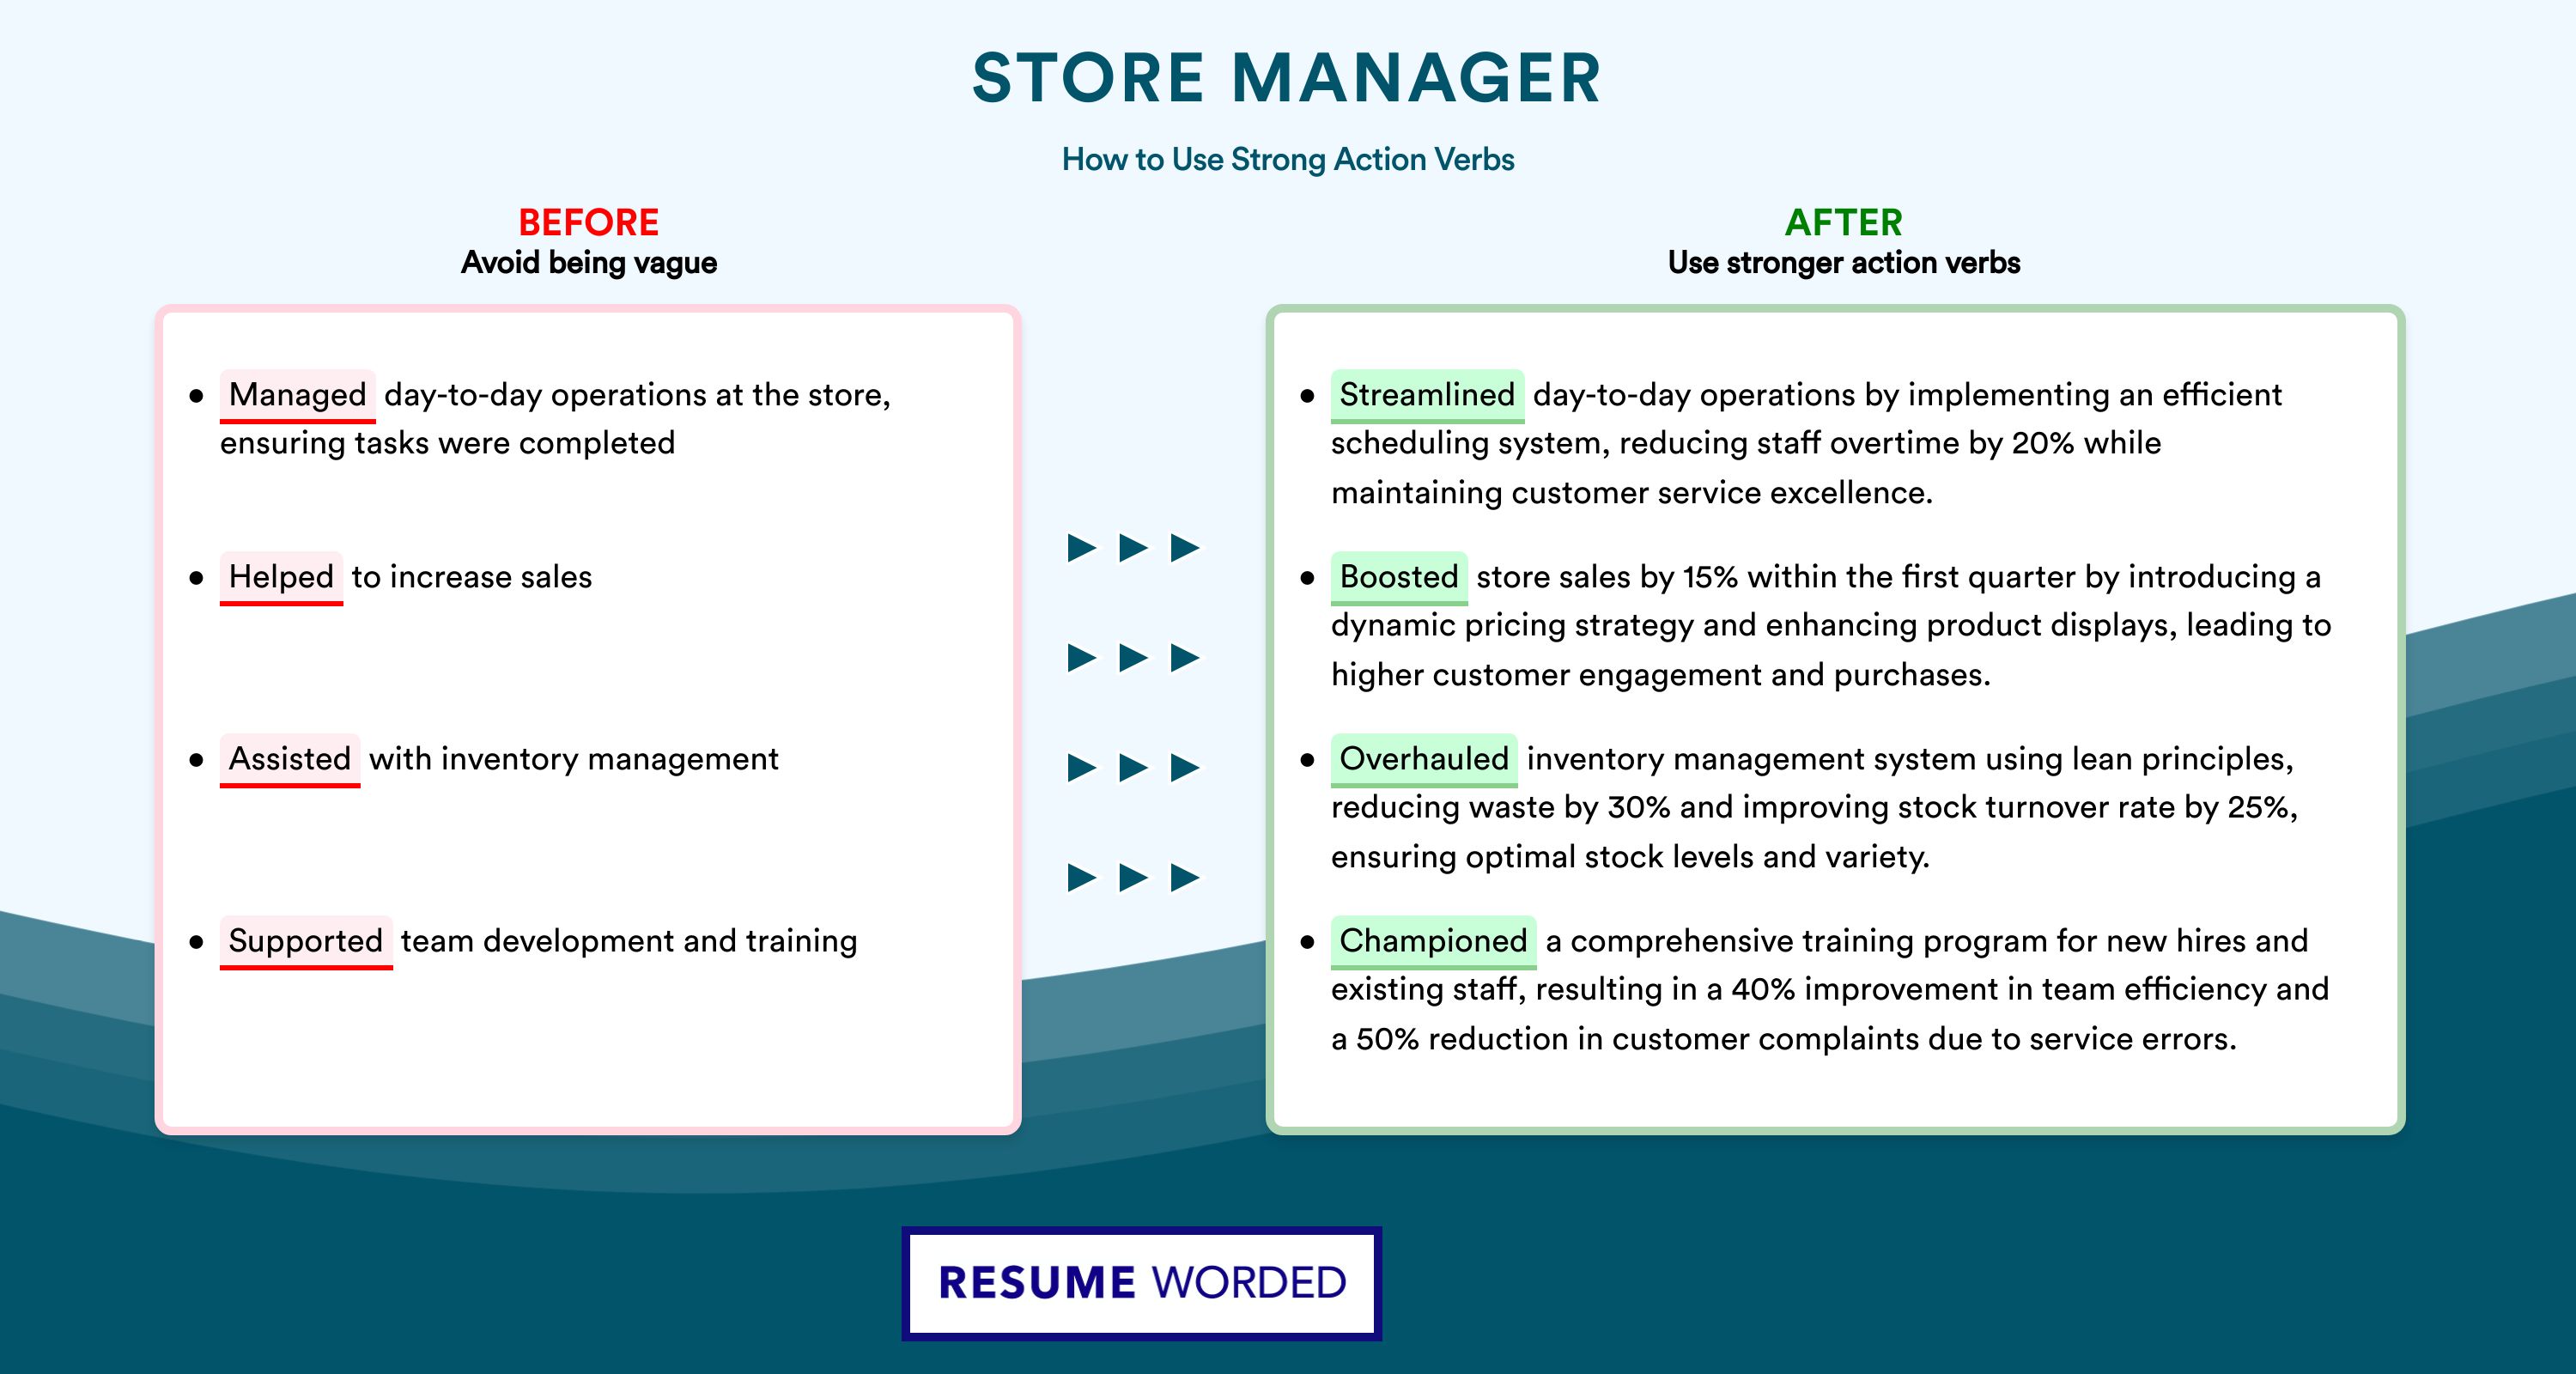 Action Verbs for Store Manager